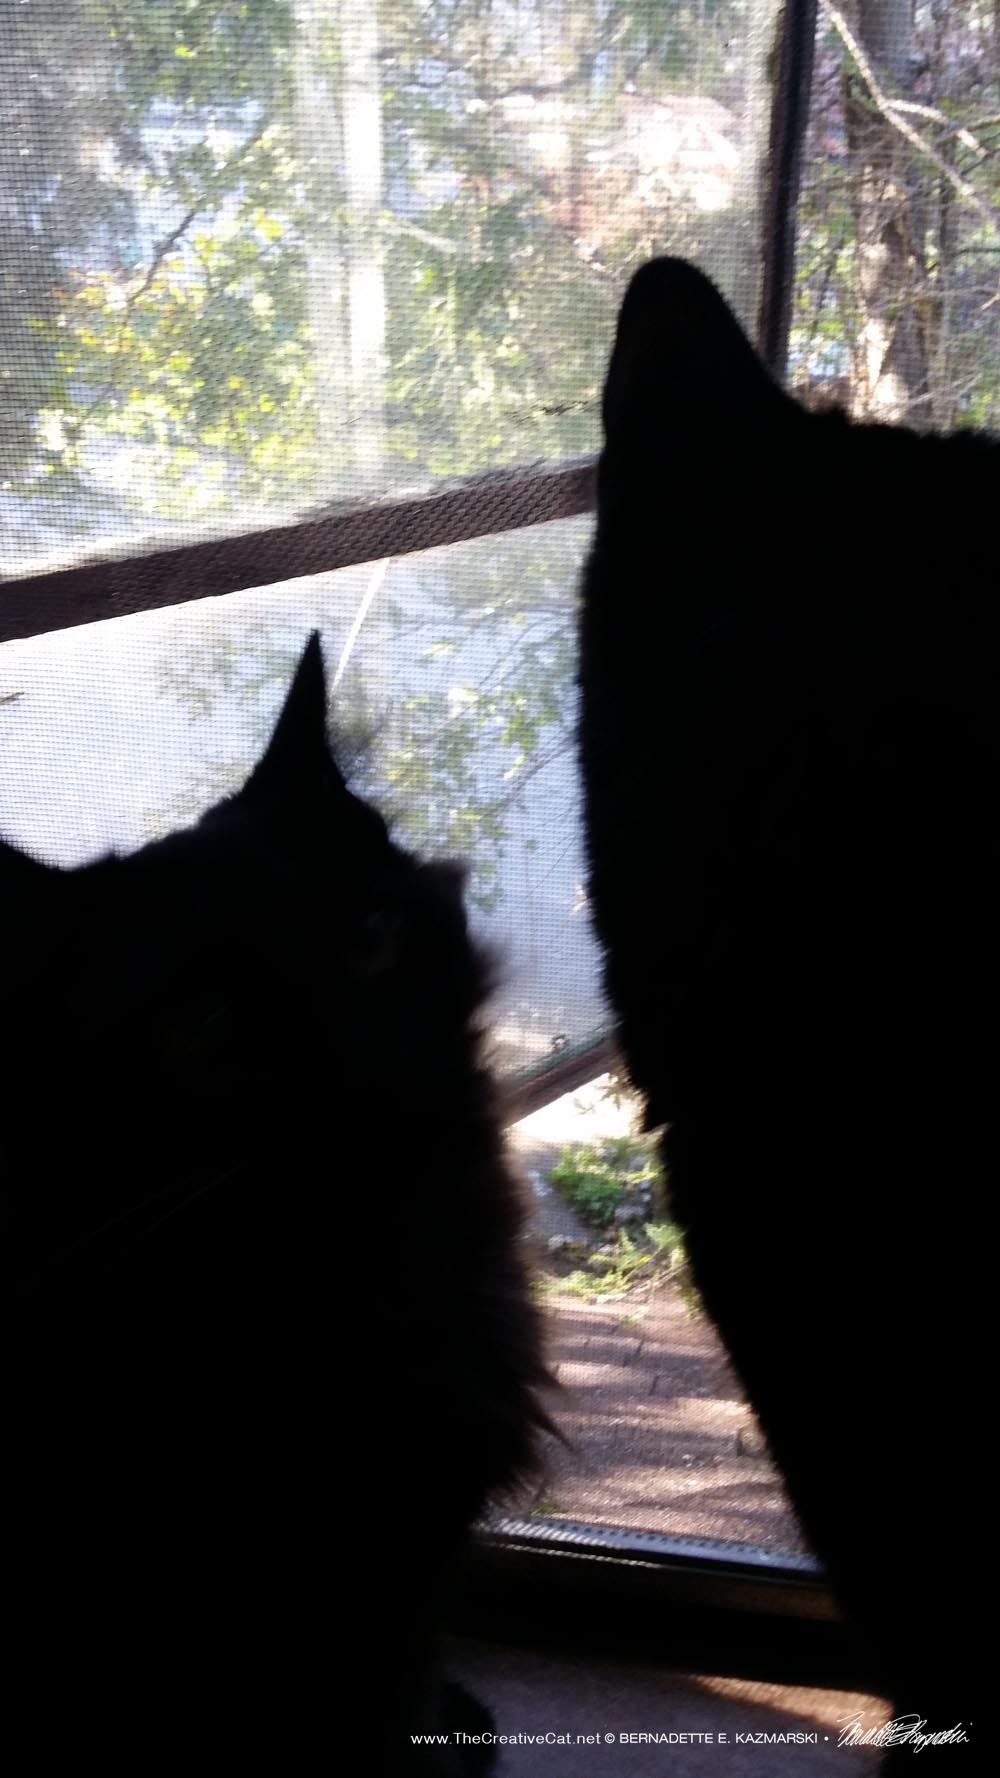 Alvina and Mewsette watch out the window. Mewsette sought her out to impart sisterly wisdom.